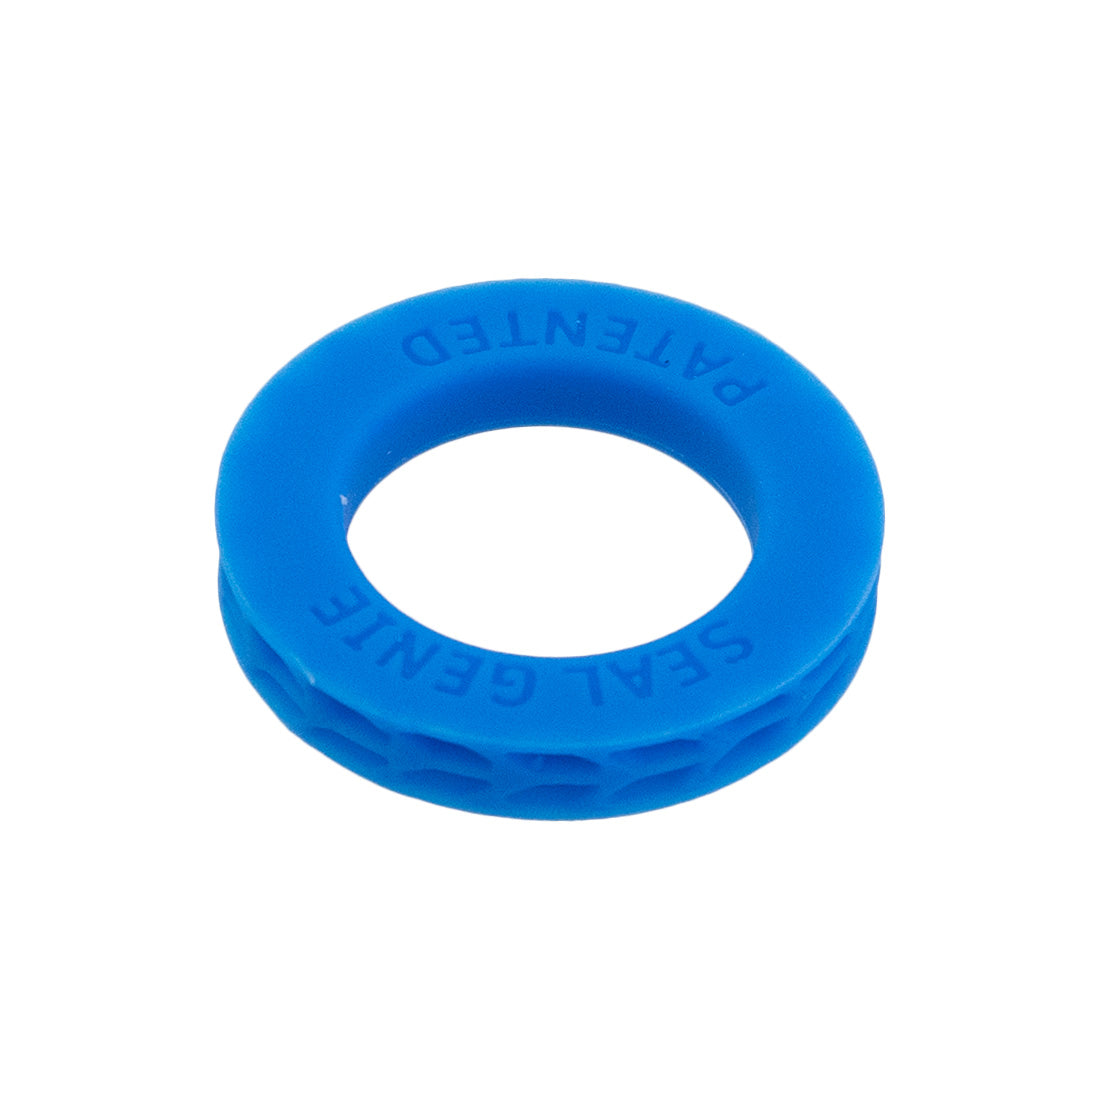 Seal Genie Silicone Hose Washer - Pack of 10